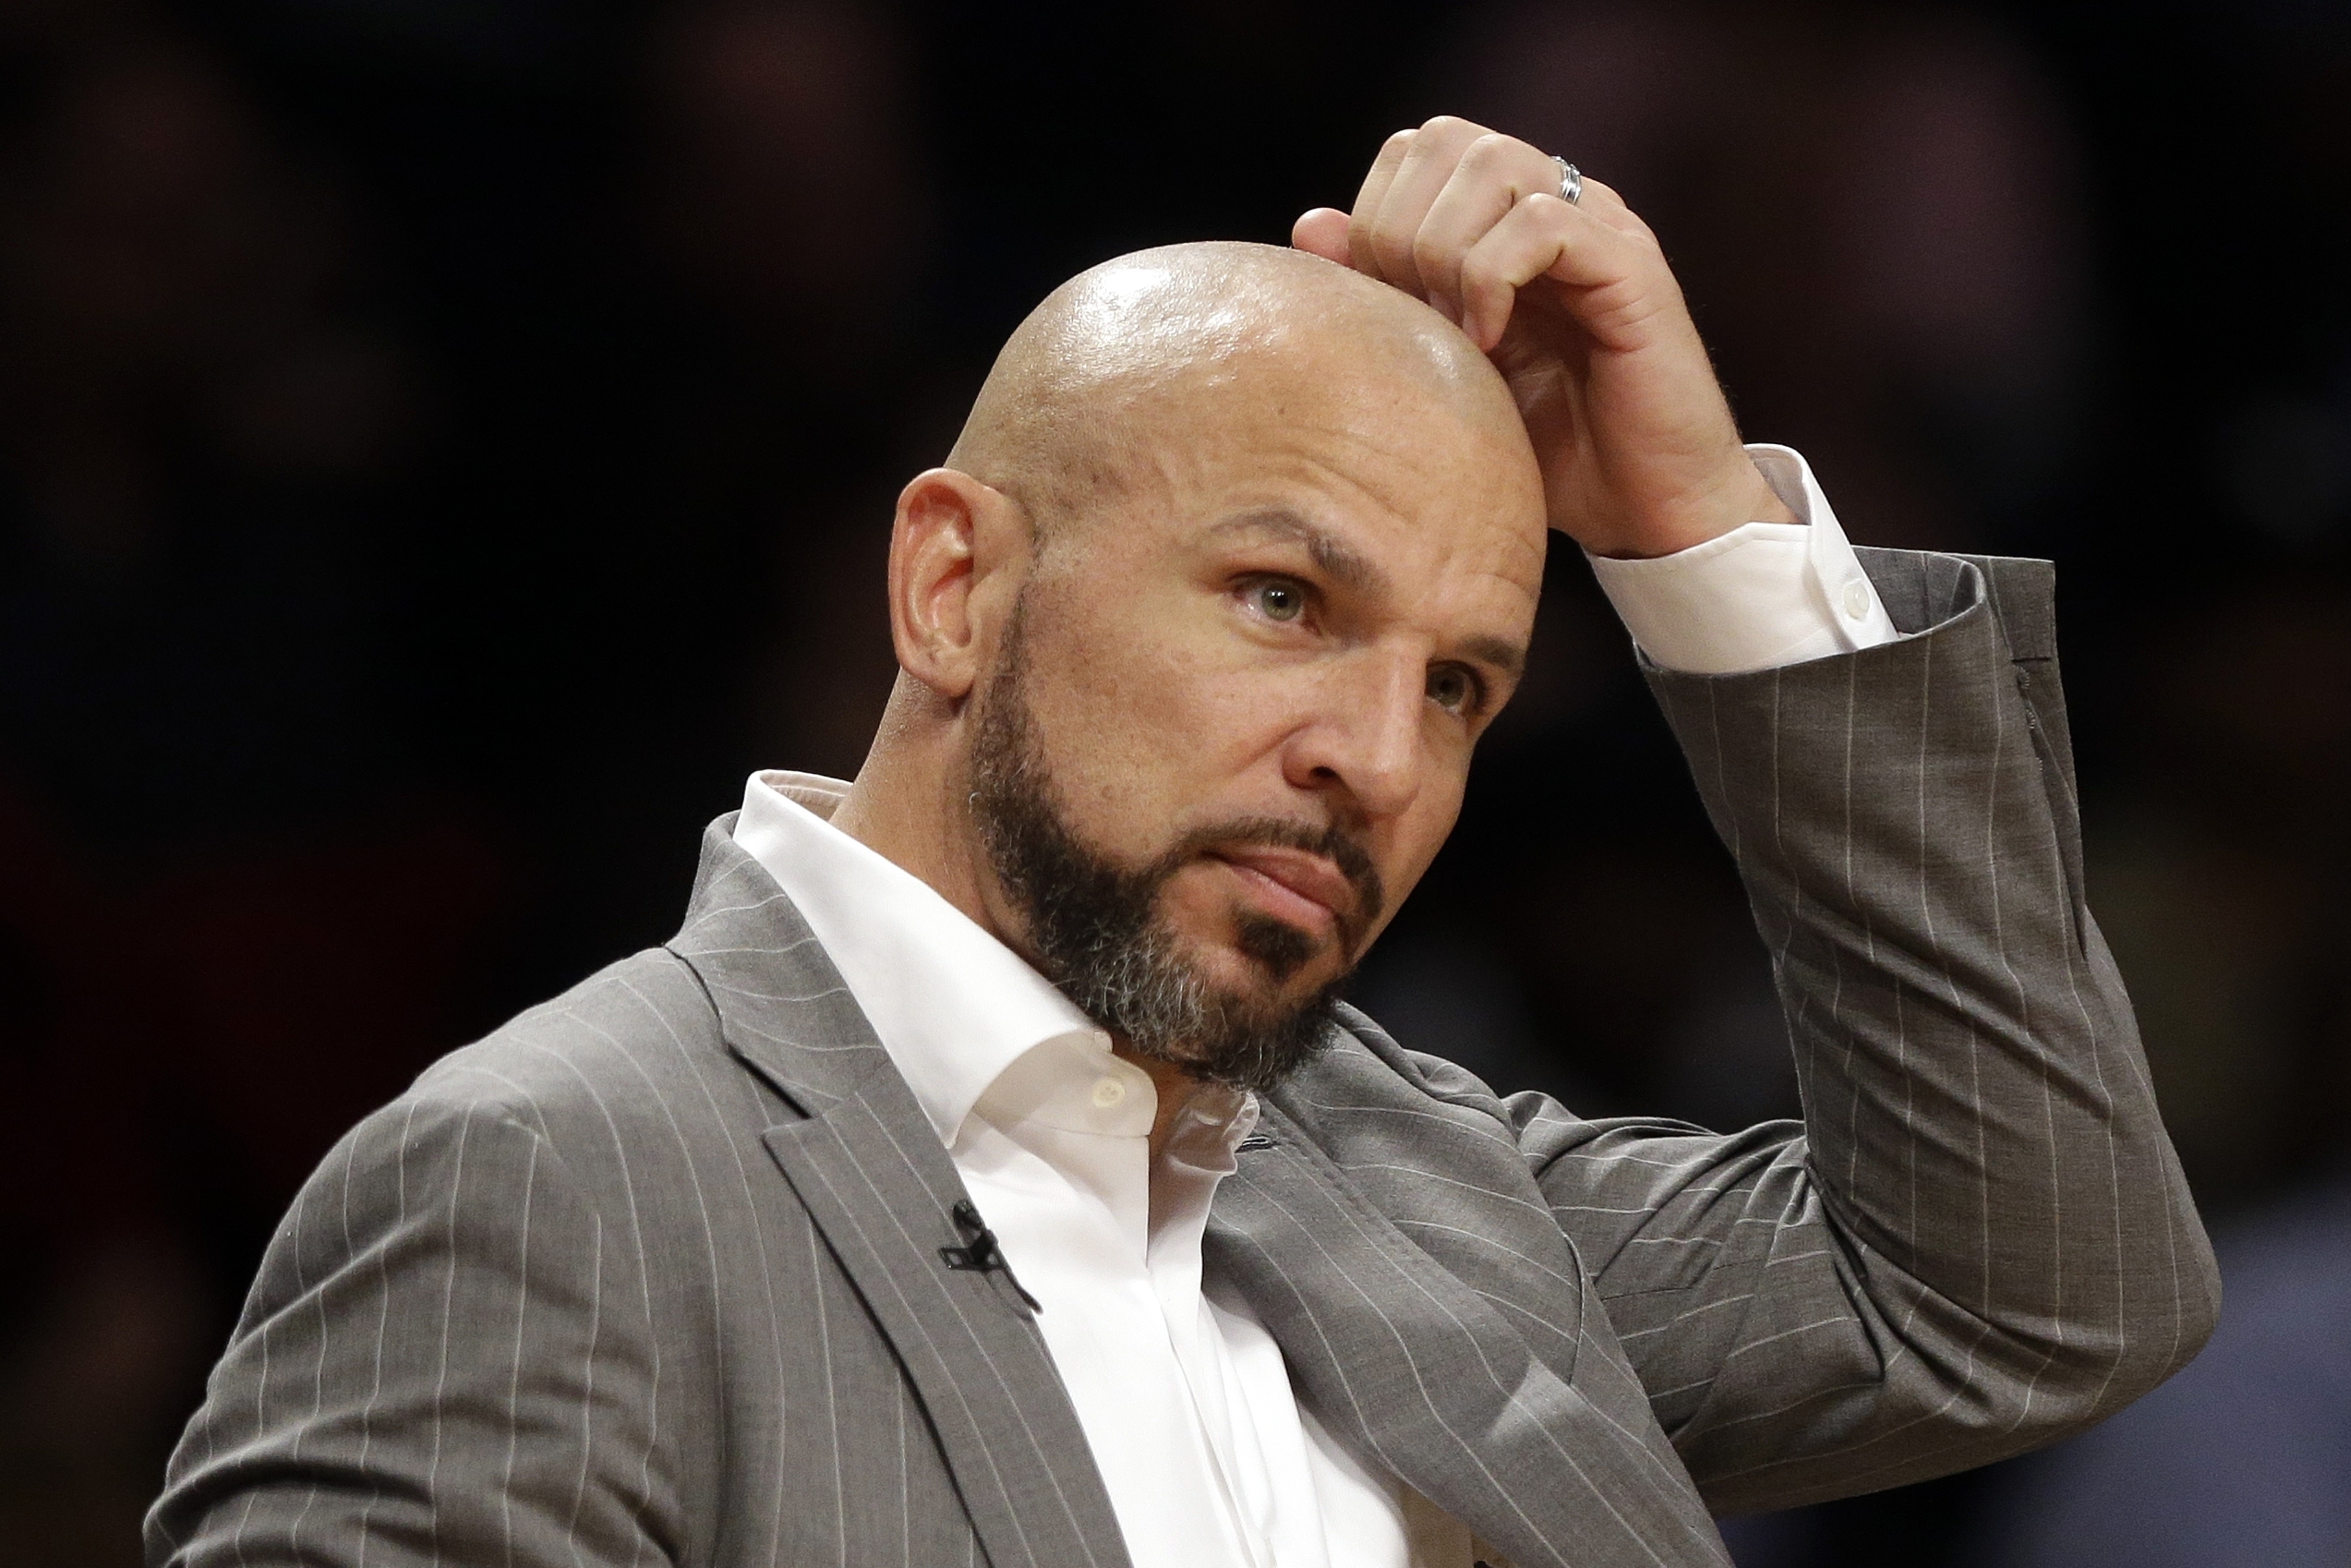 Jason Kidd's Son Exposes His Dad For Being An Absentee Father, Says They  Don't Have A Relationship And Are Not On Speaking Terms - BroBible